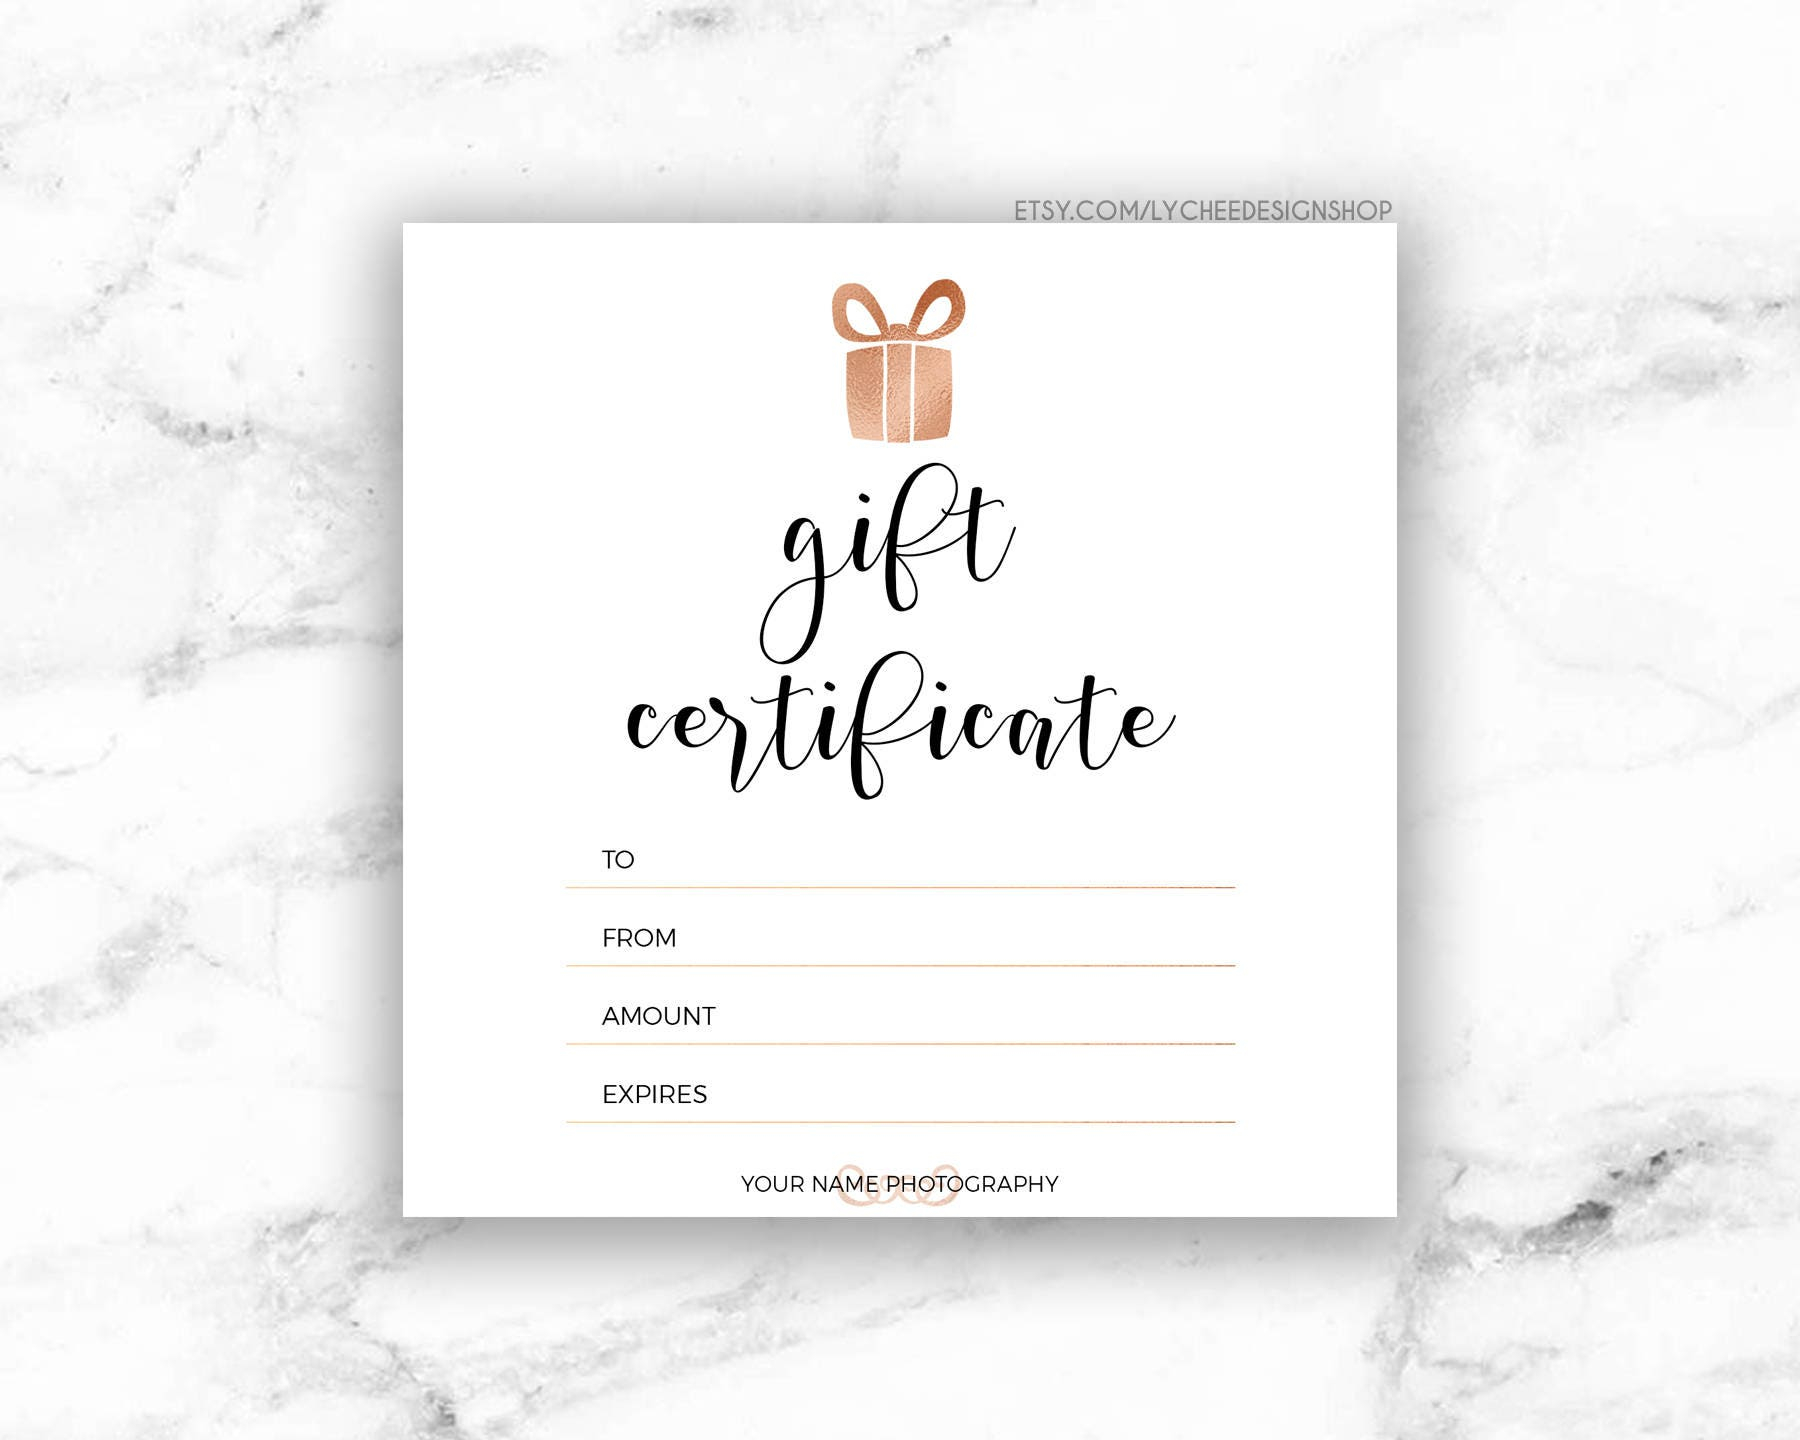 Printable Rose Gold Gift Certificate Template  Editable Photography Studio  Gift Card design  Photoshop template PSD  INSTANT DOWNLOAD With Regard To Gift Certificate Template Photoshop